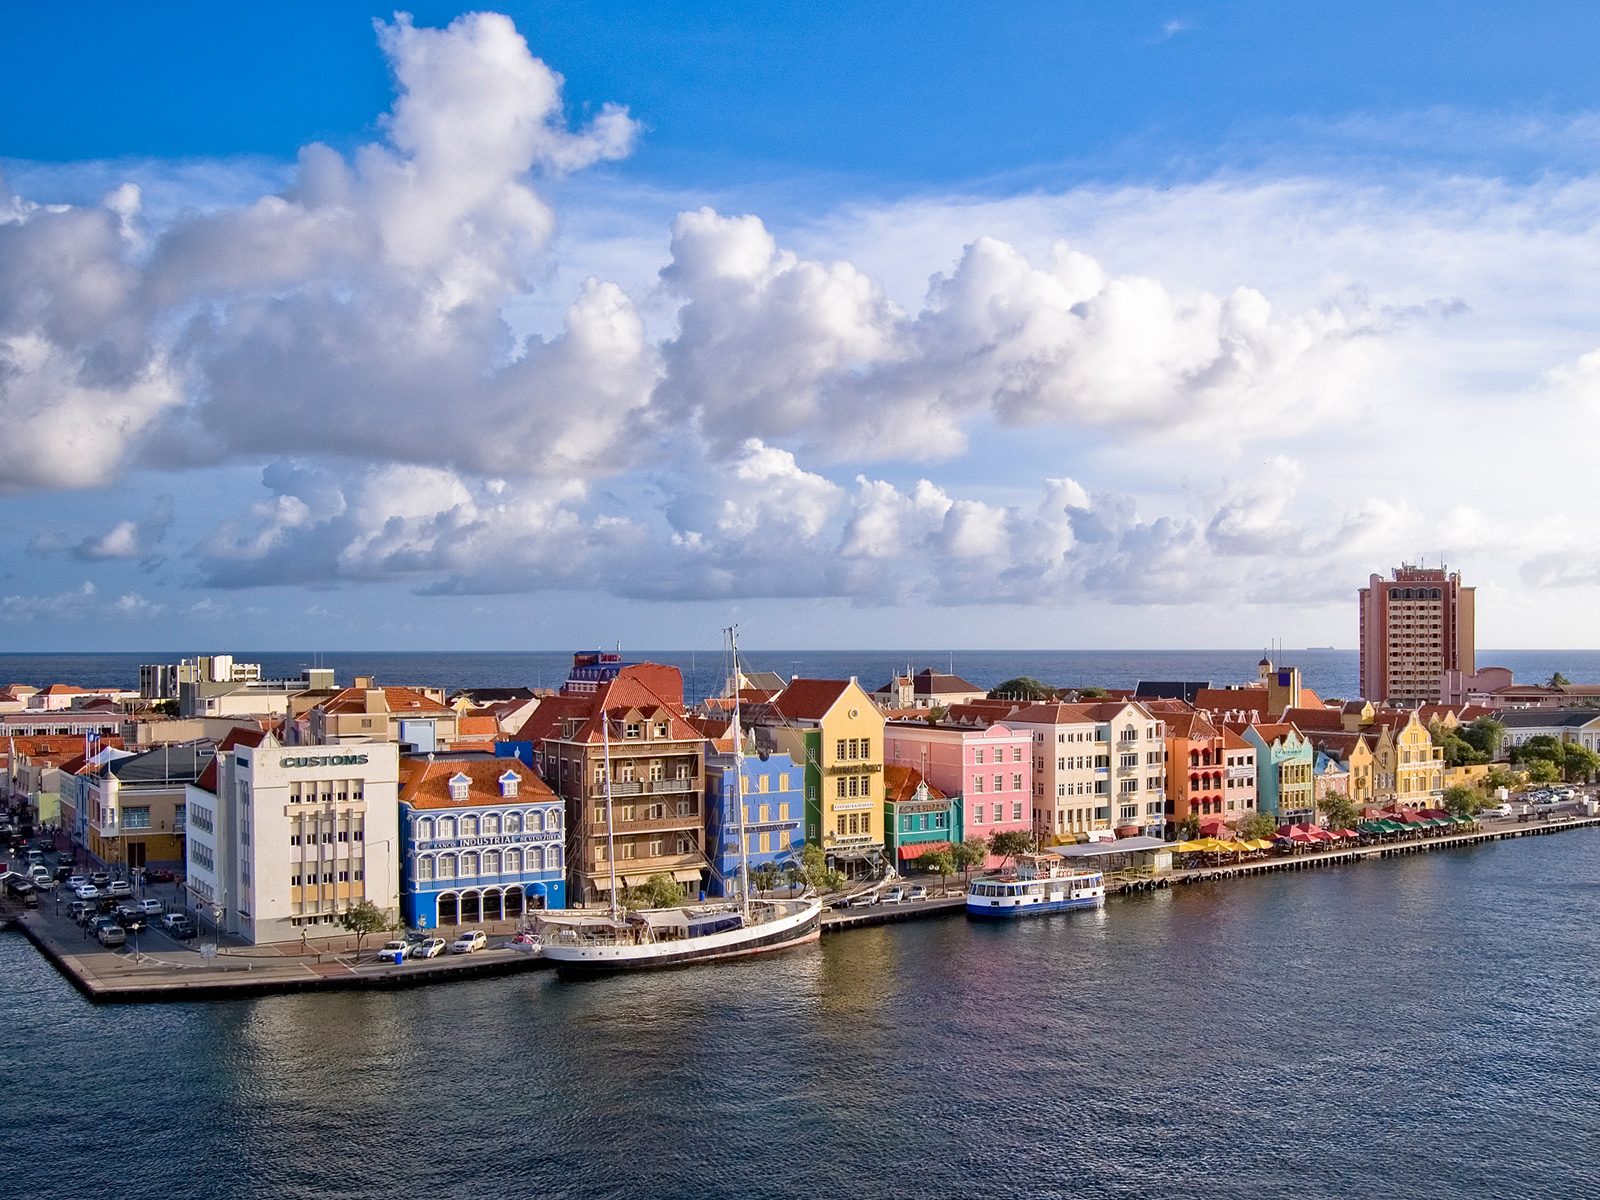 Willemstad is a UNESCO World Heritage Site